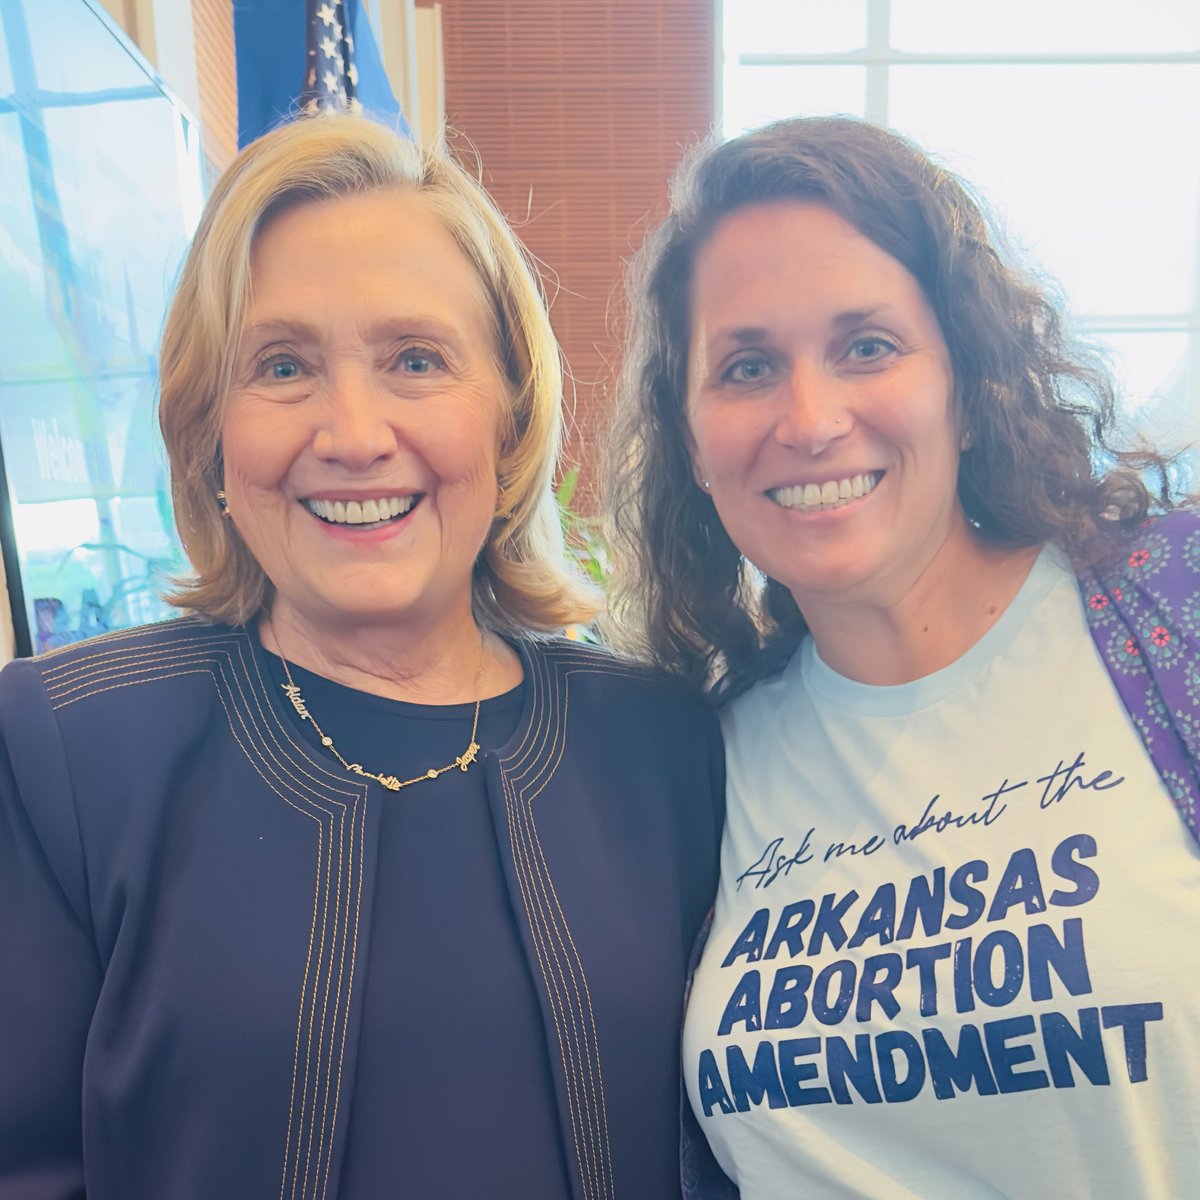 Thank you, @HillaryClinton, for the timeless rallying cry that 'human rights are women's rights and women's rights are human rights.' 

Time to get the #ARabortionamendment on the ballot.

 #AbortionIsHealthcare #arpx